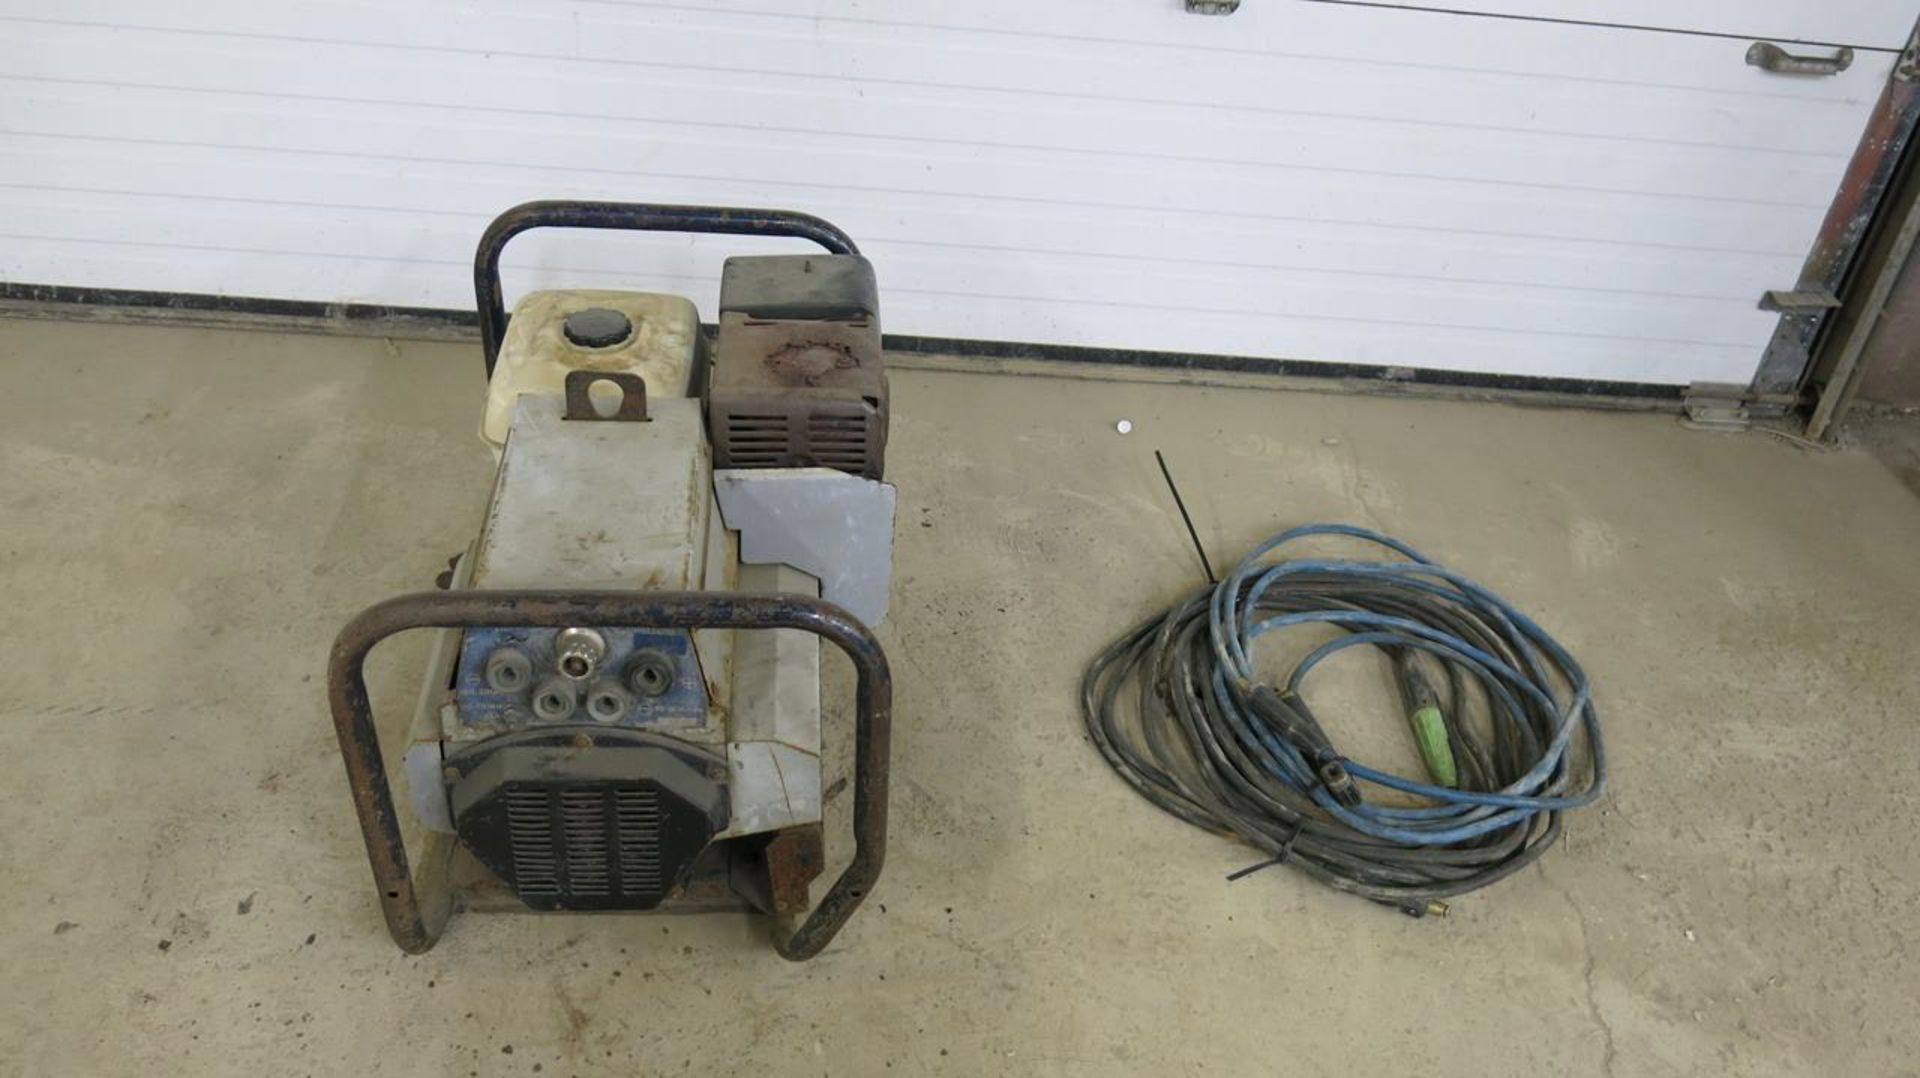 RED-D-ARC, GX200, 2+4, 200 AMP, GAS POWERED, WELDER - Image 2 of 7